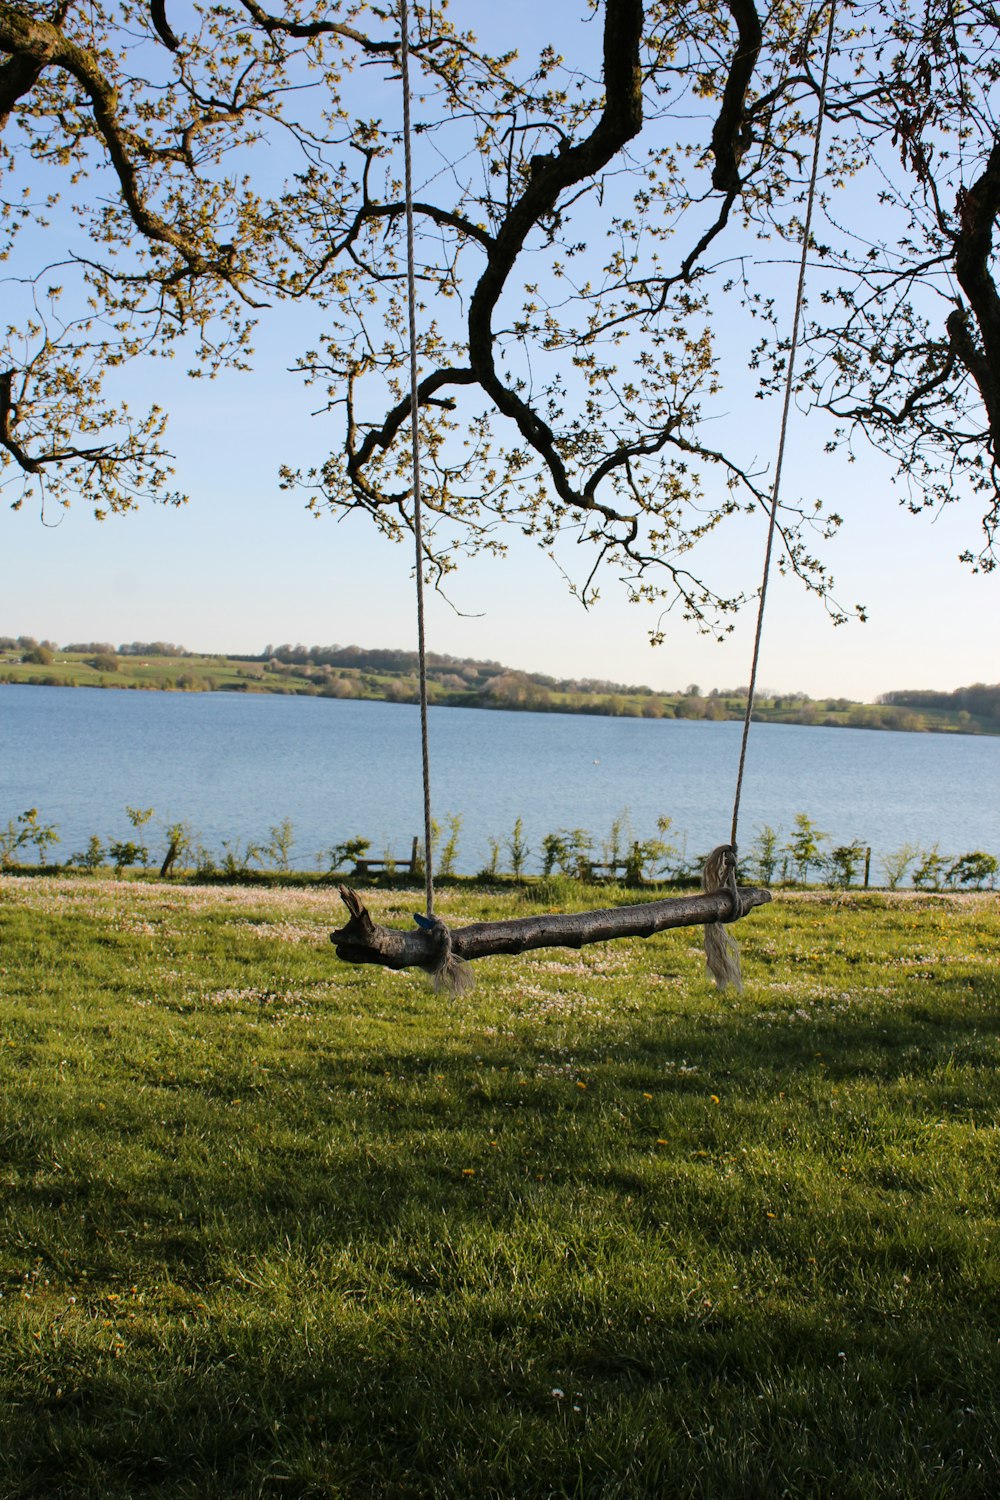 a tree branch in a grassy area next to a body of water